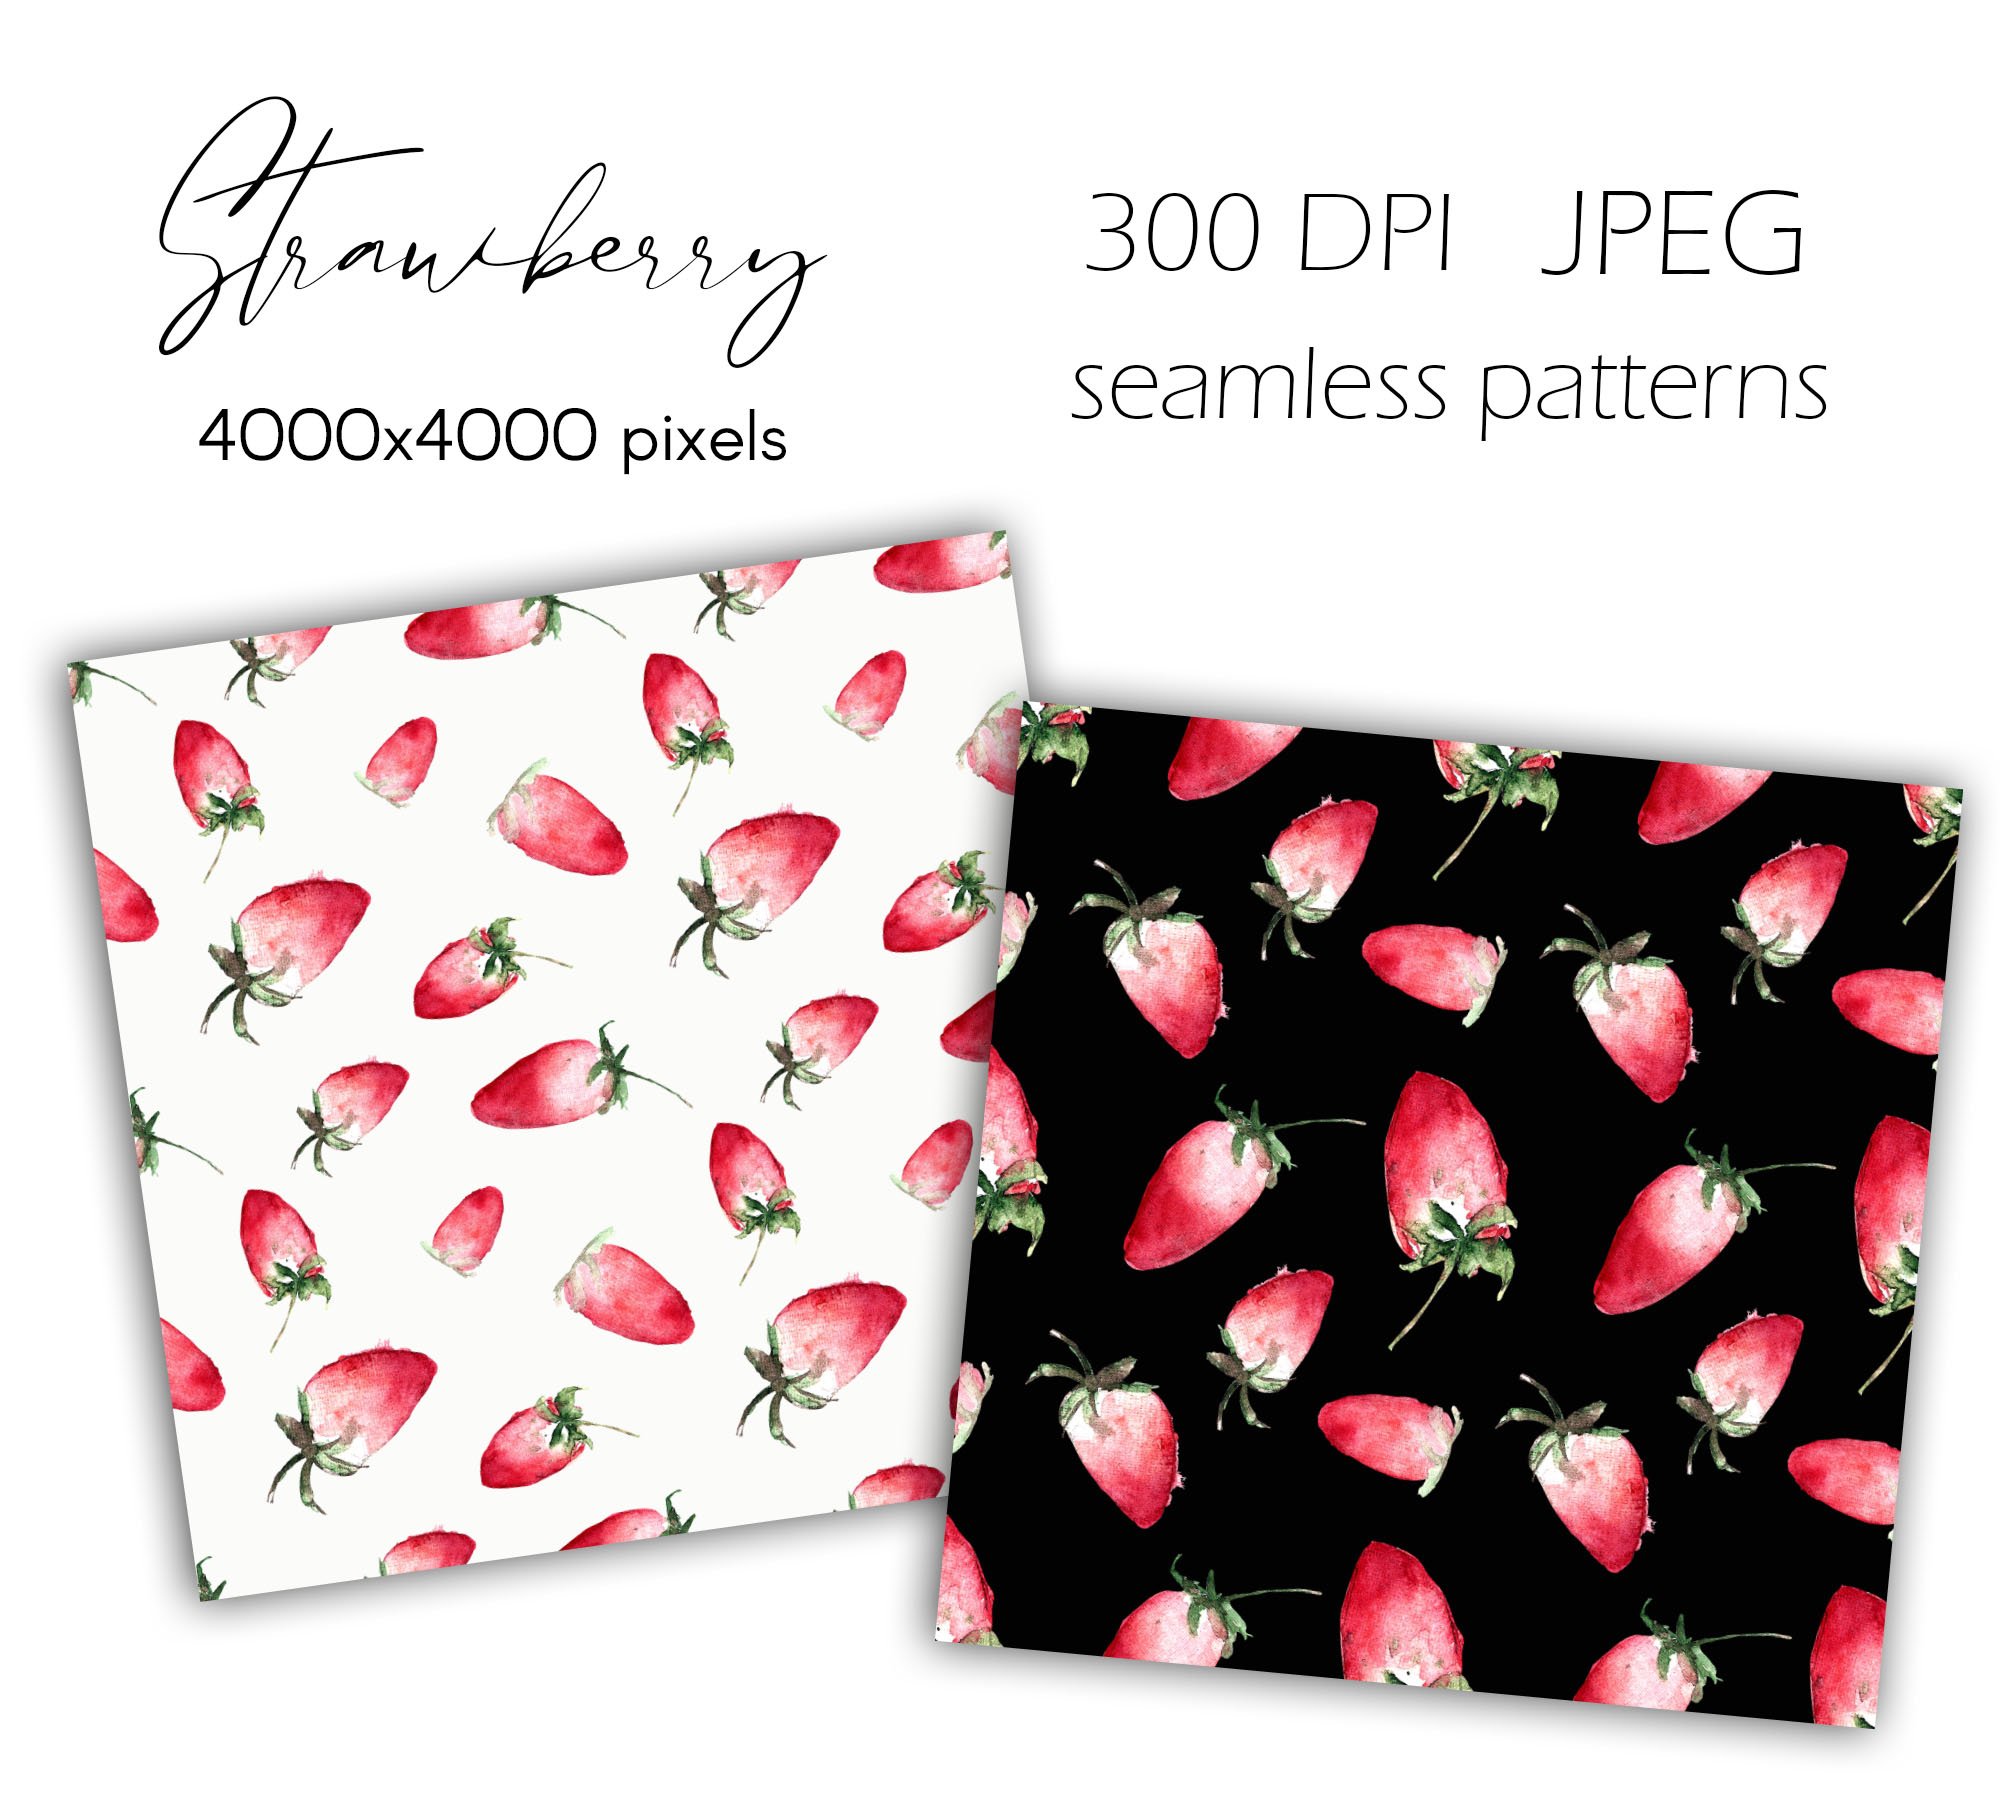 2 white and black seamless patterns with strawberries on a white background.